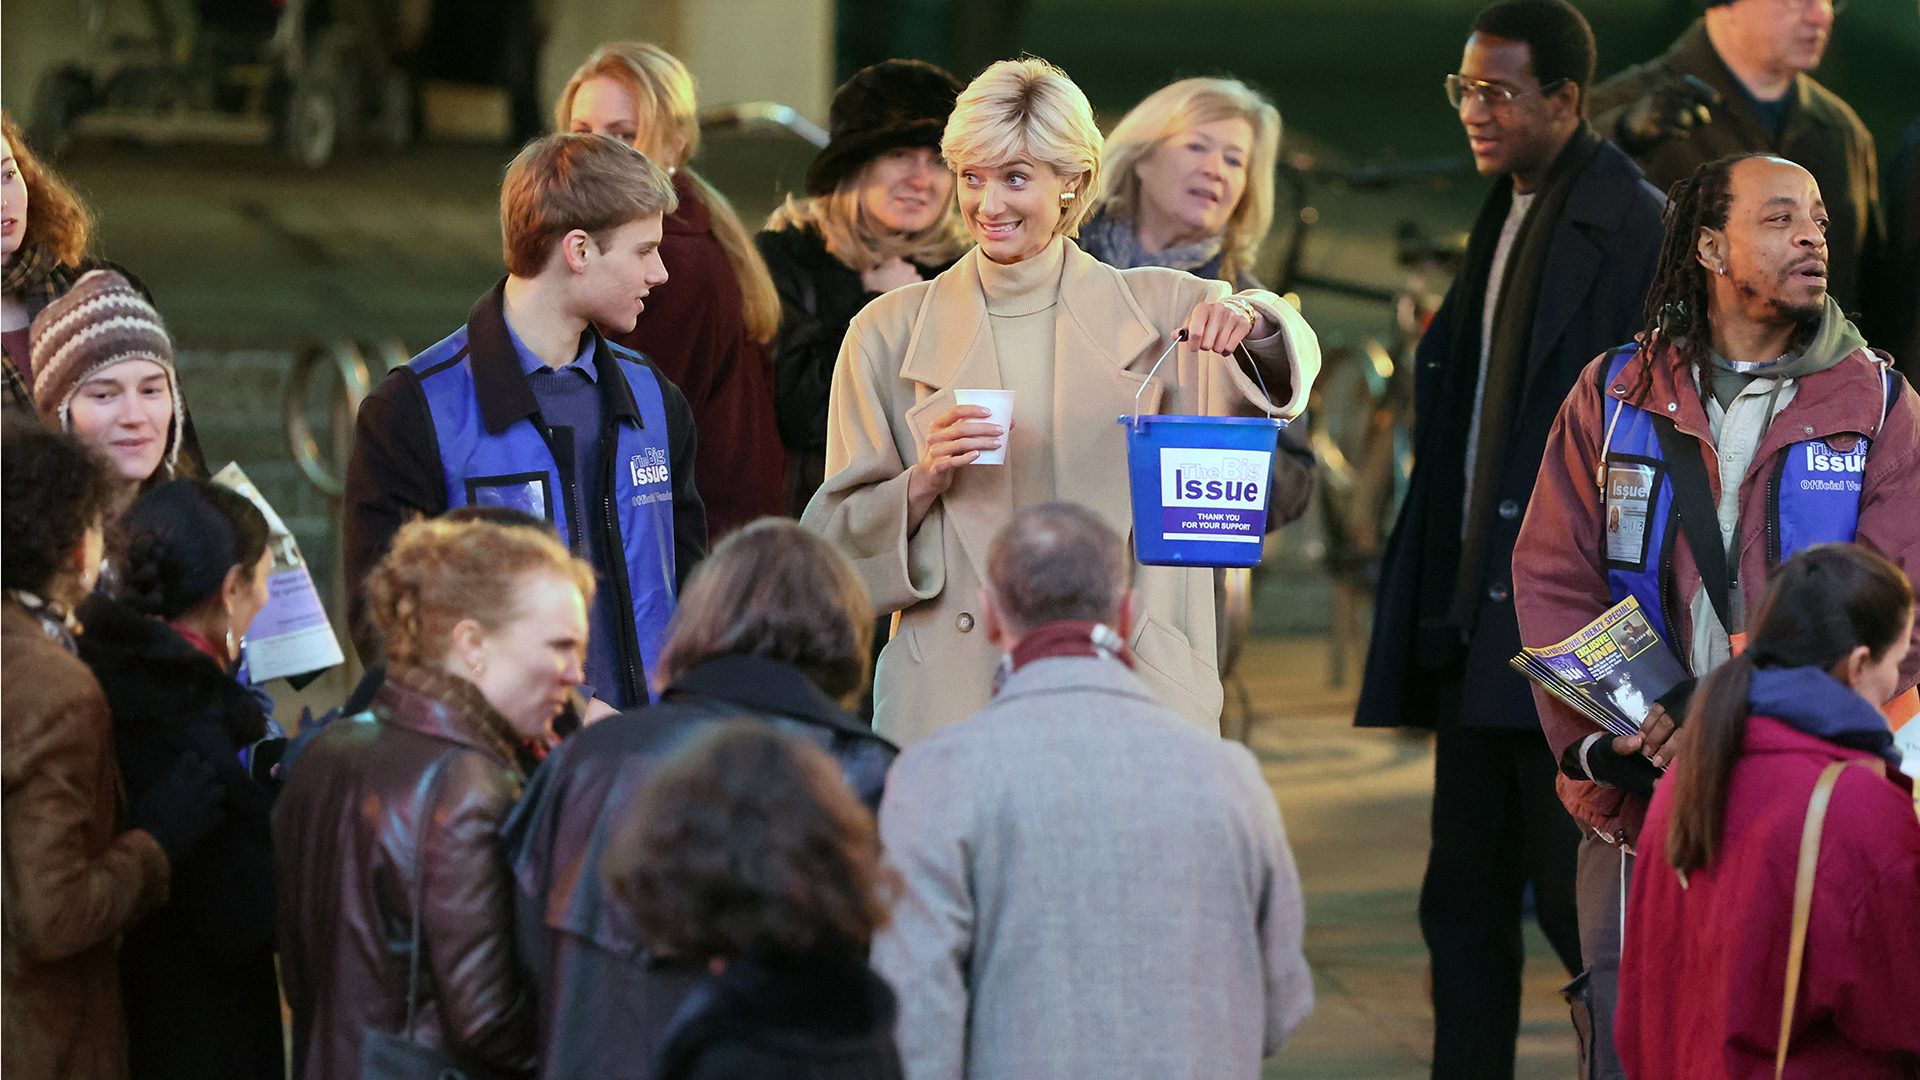 Elizabeth Debicki's Princess Diana and Rufus Kampa's Prince William filming for The Crown, selling The Big Issue outside a London underground station.